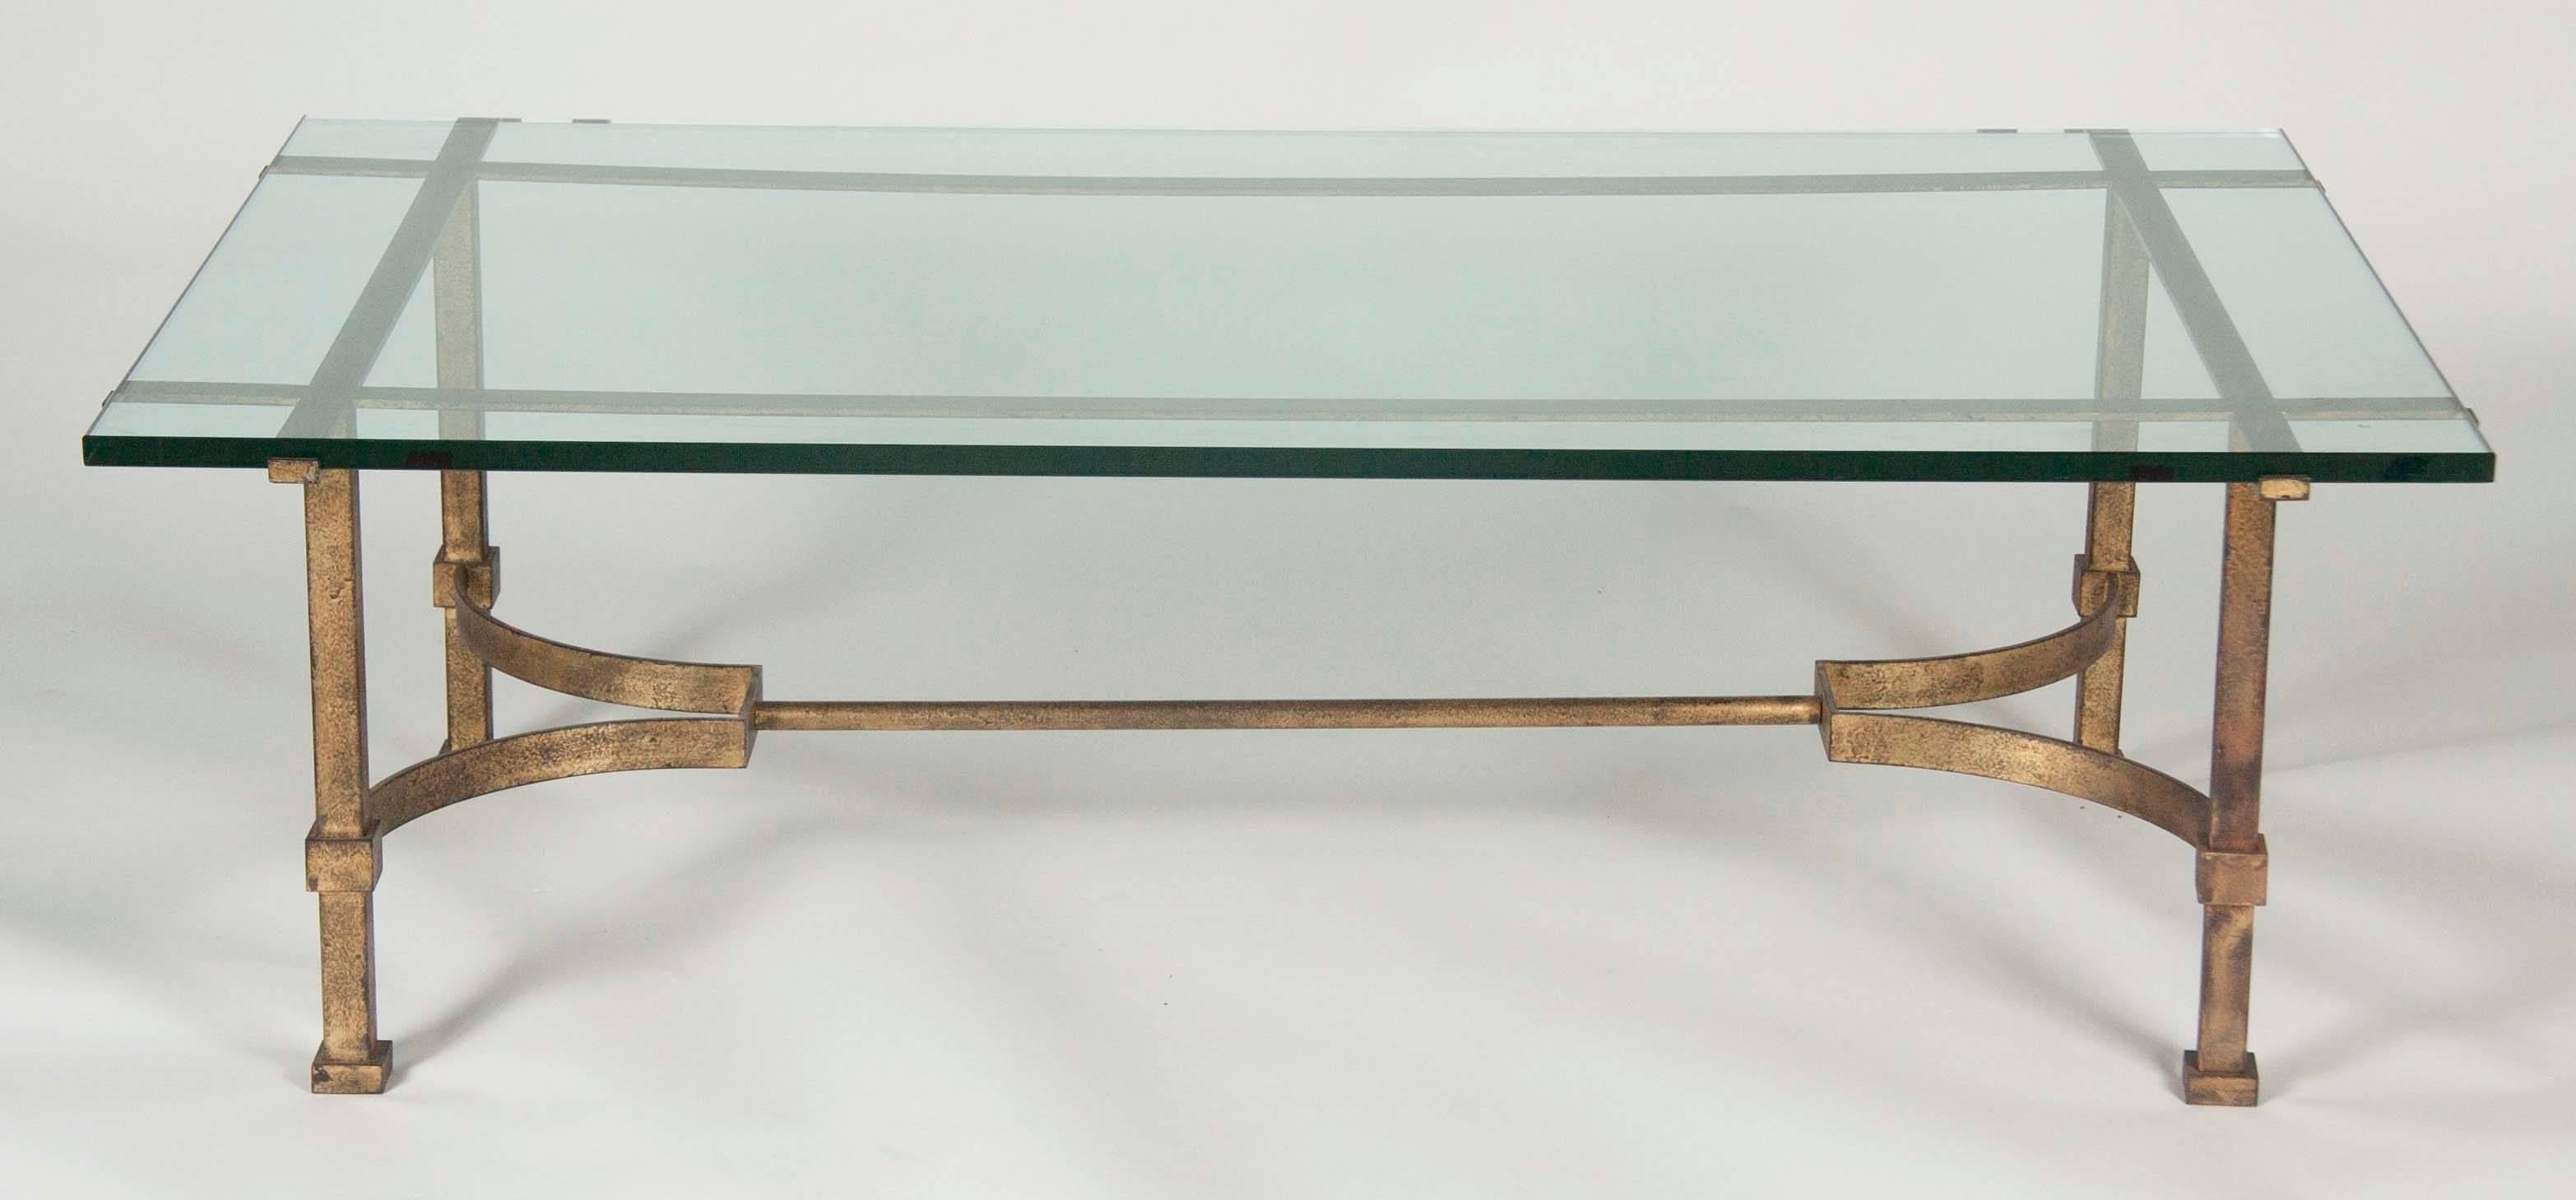 A gilt bronze and glass top coffee table attributed to Maison Jansen.